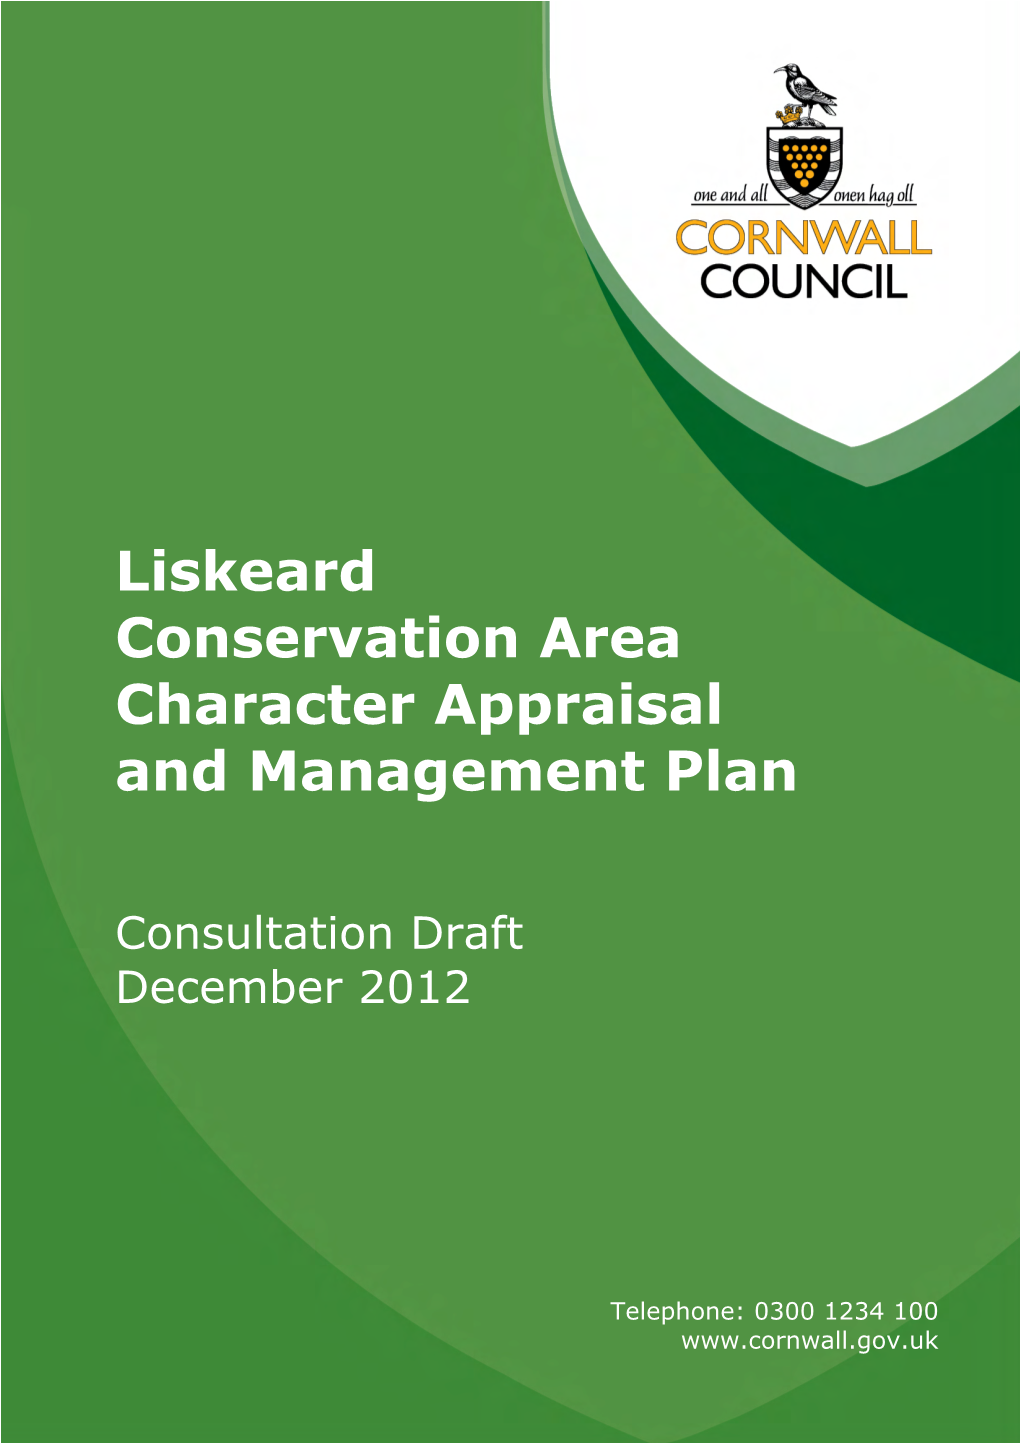 Liskeard Conservation Area Character Appraisal and Management Plan